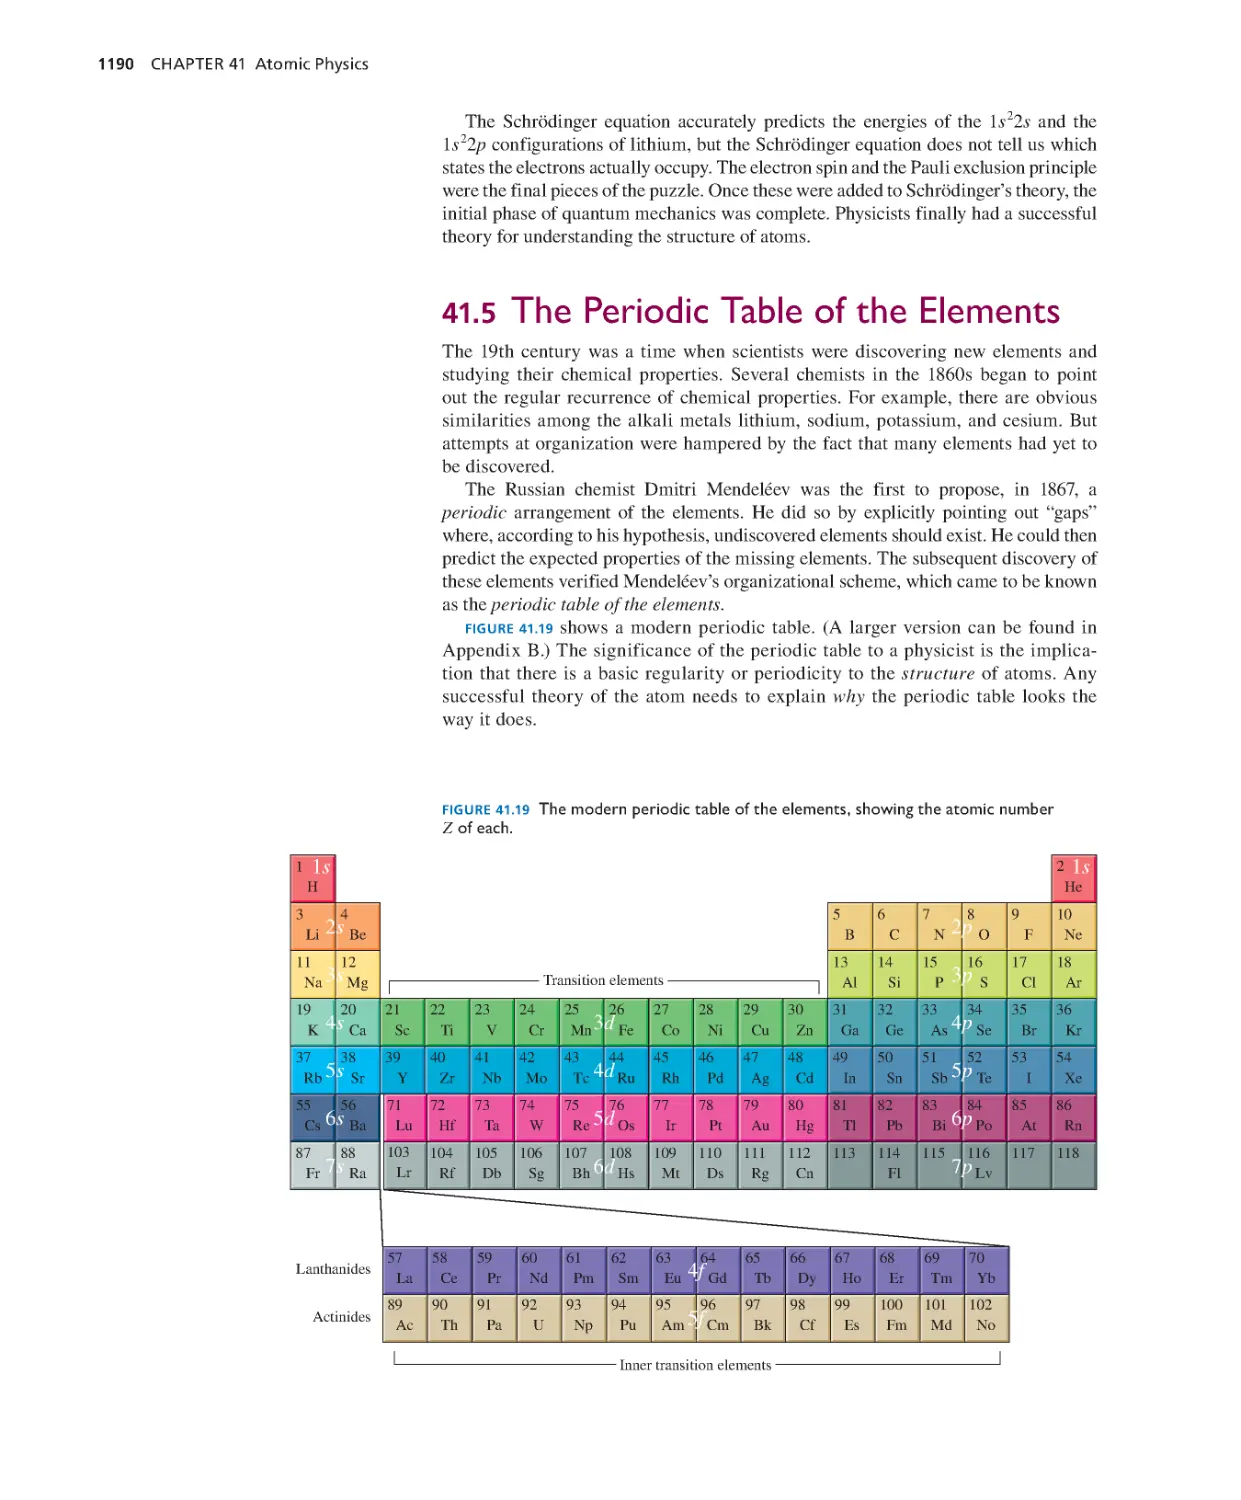 41.5. The Periodic Table of the Elements